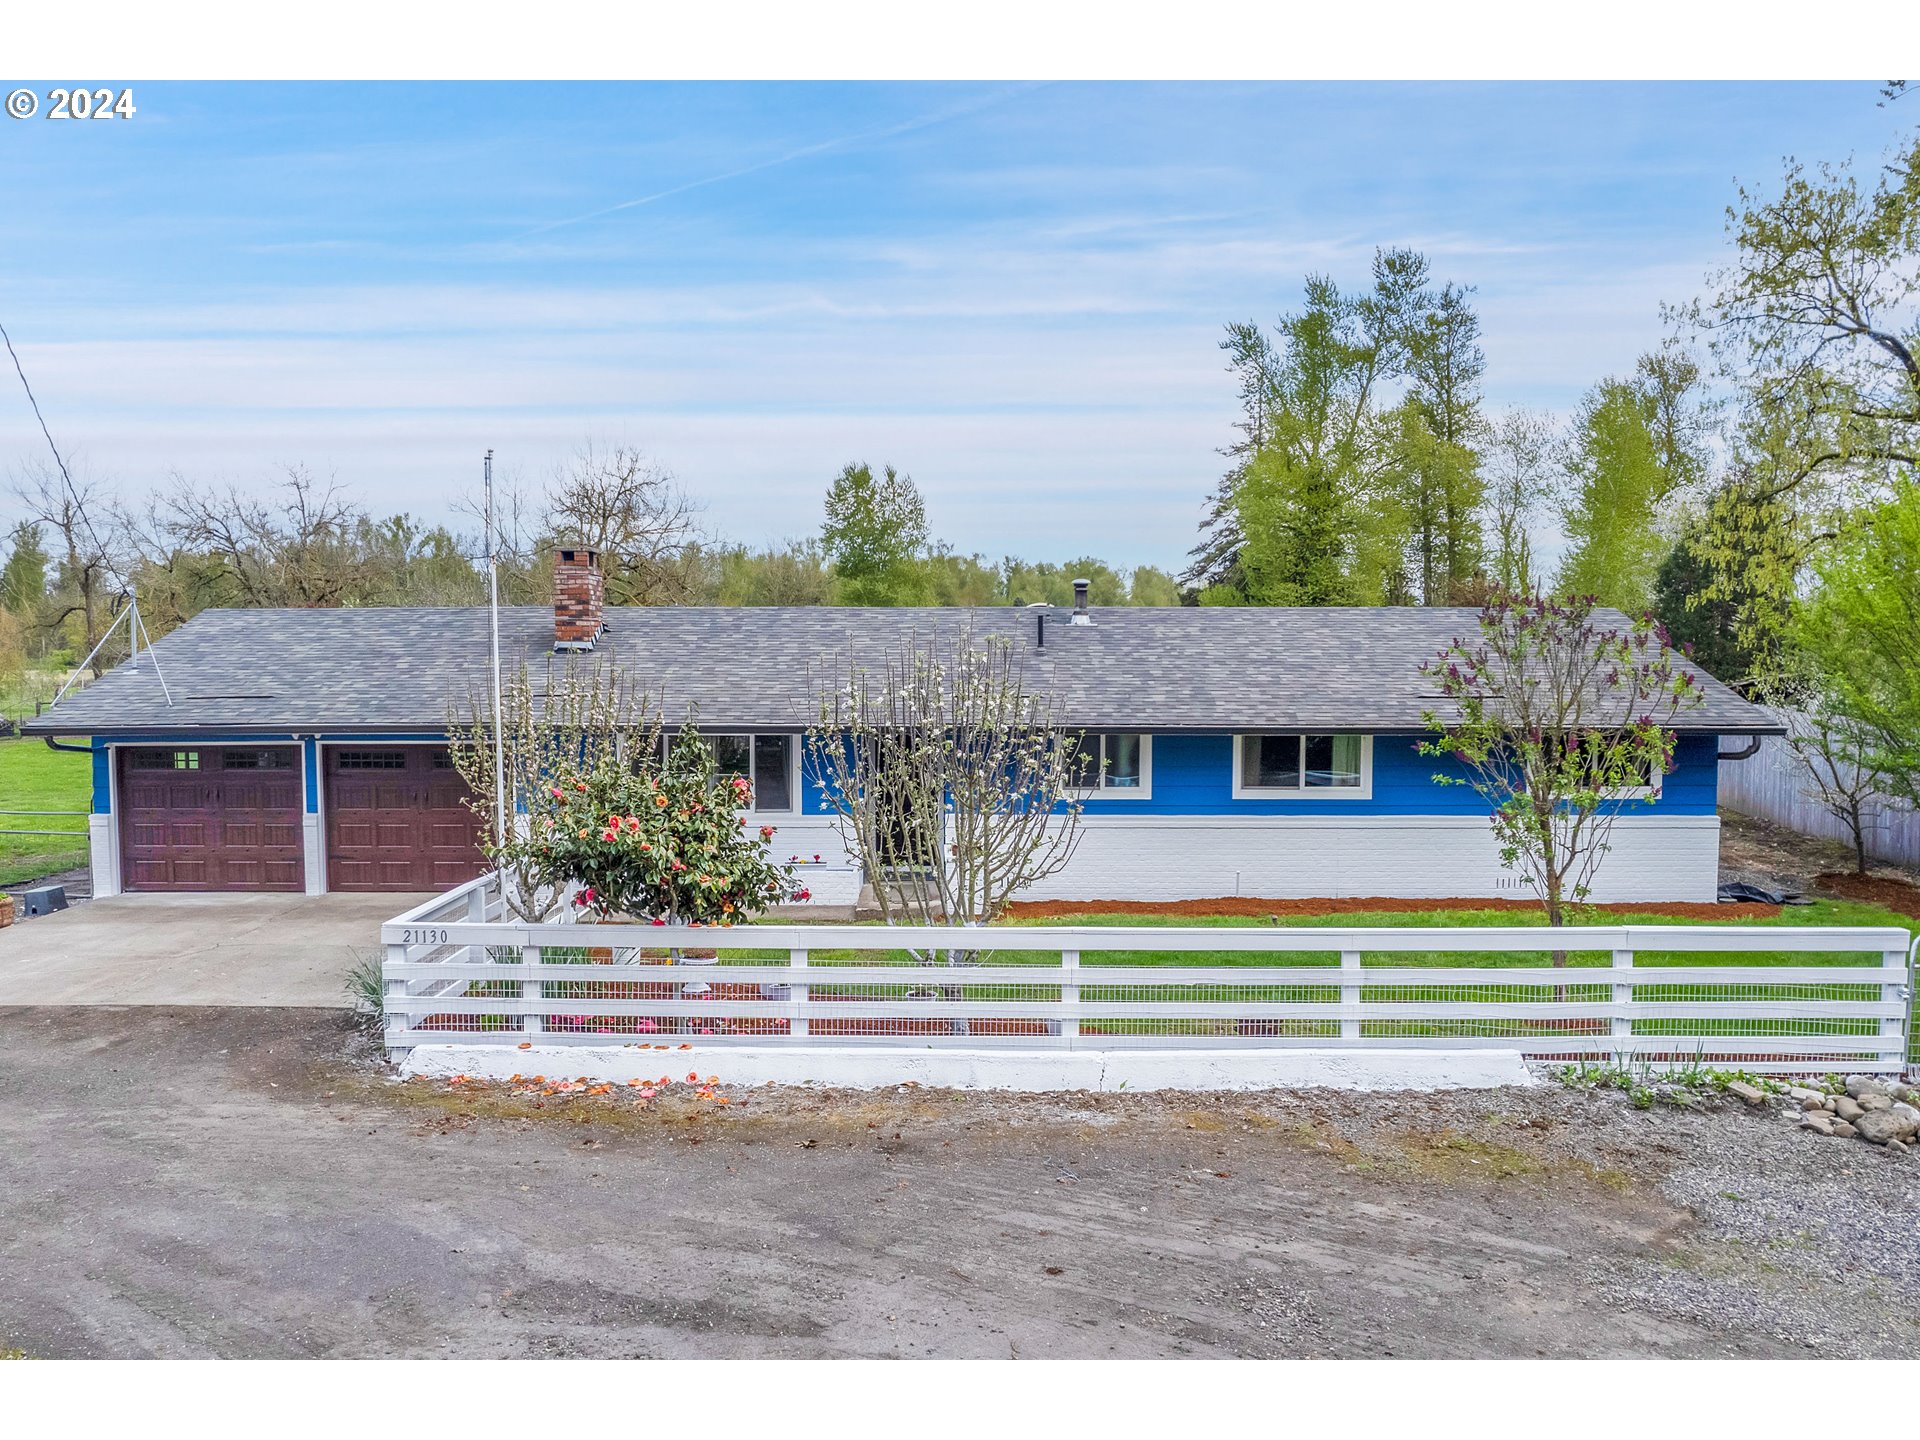 Photo of 21130 S PEACH RD, Canby, OR 97013, Canby, OR 97013